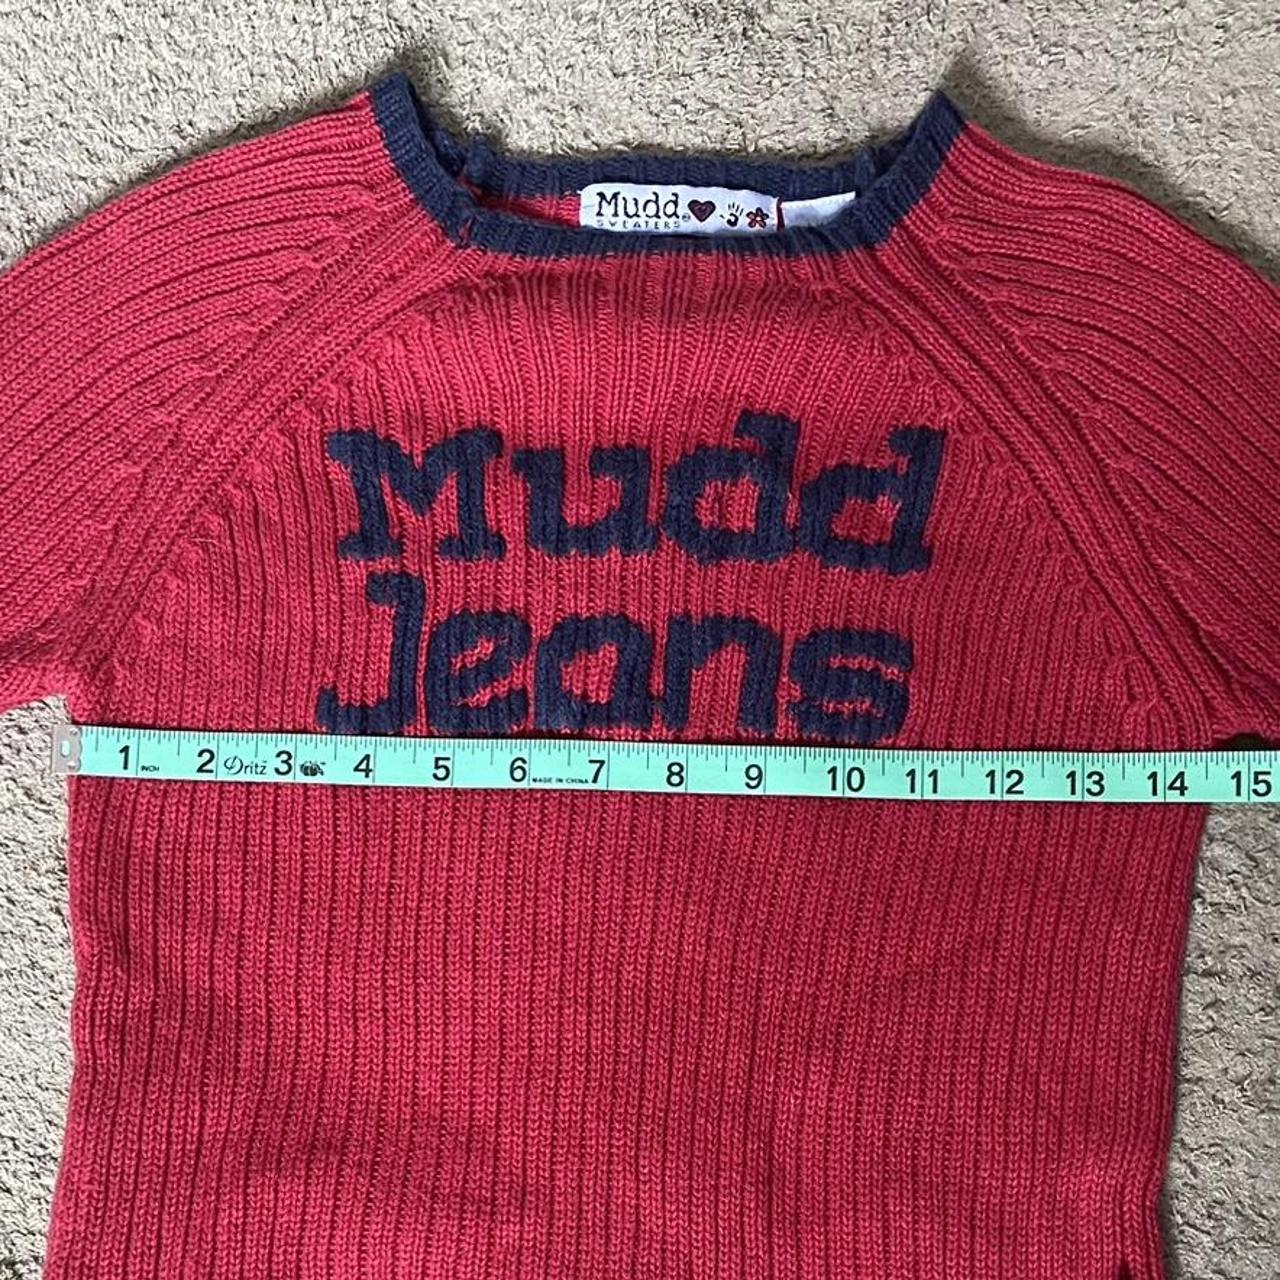 Vintage red and navy blue mudd sweater Size large... - Depop